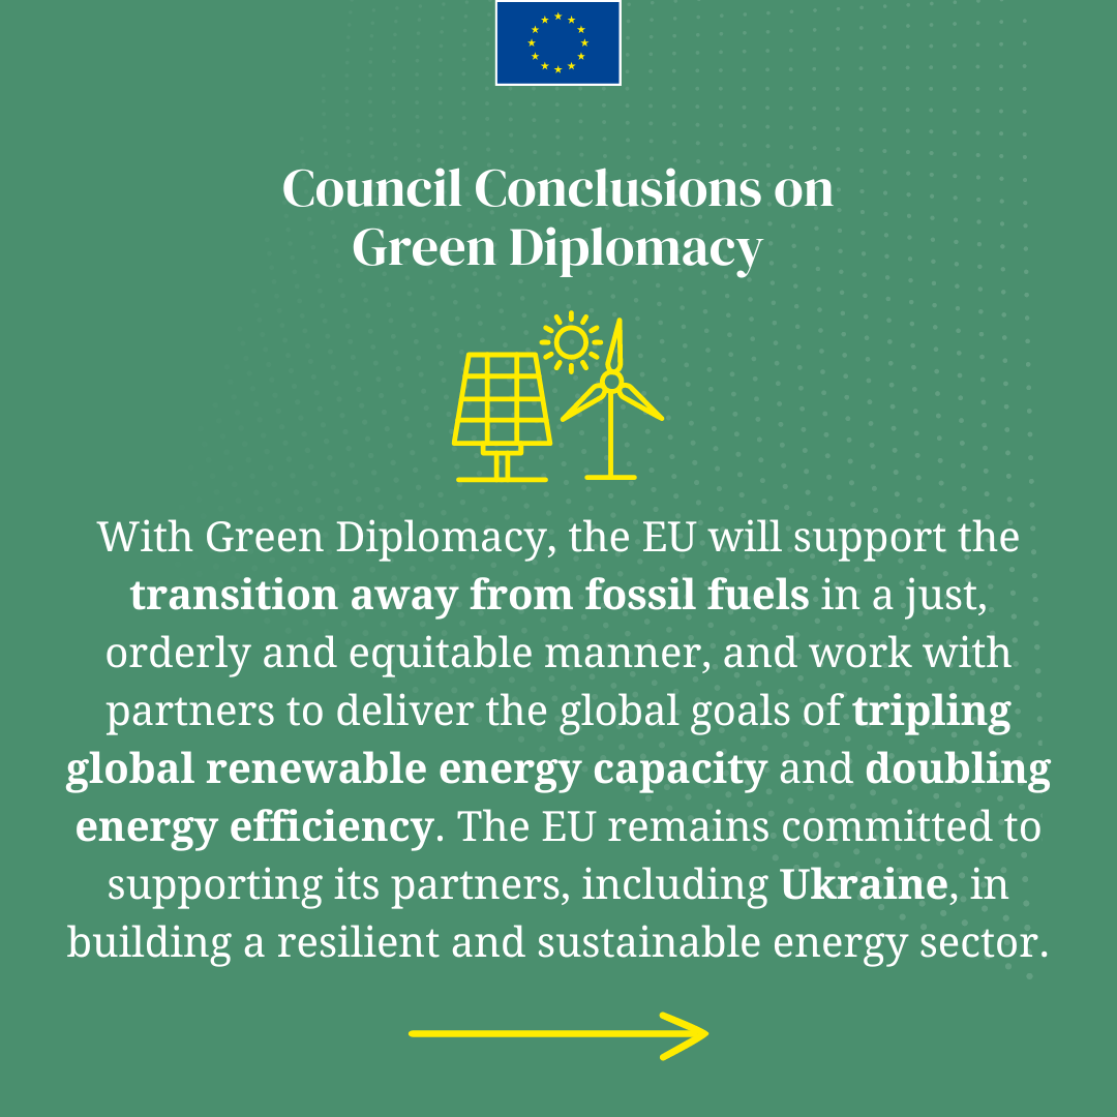 Green Diplomacy Council Conclusions Social Media Cards